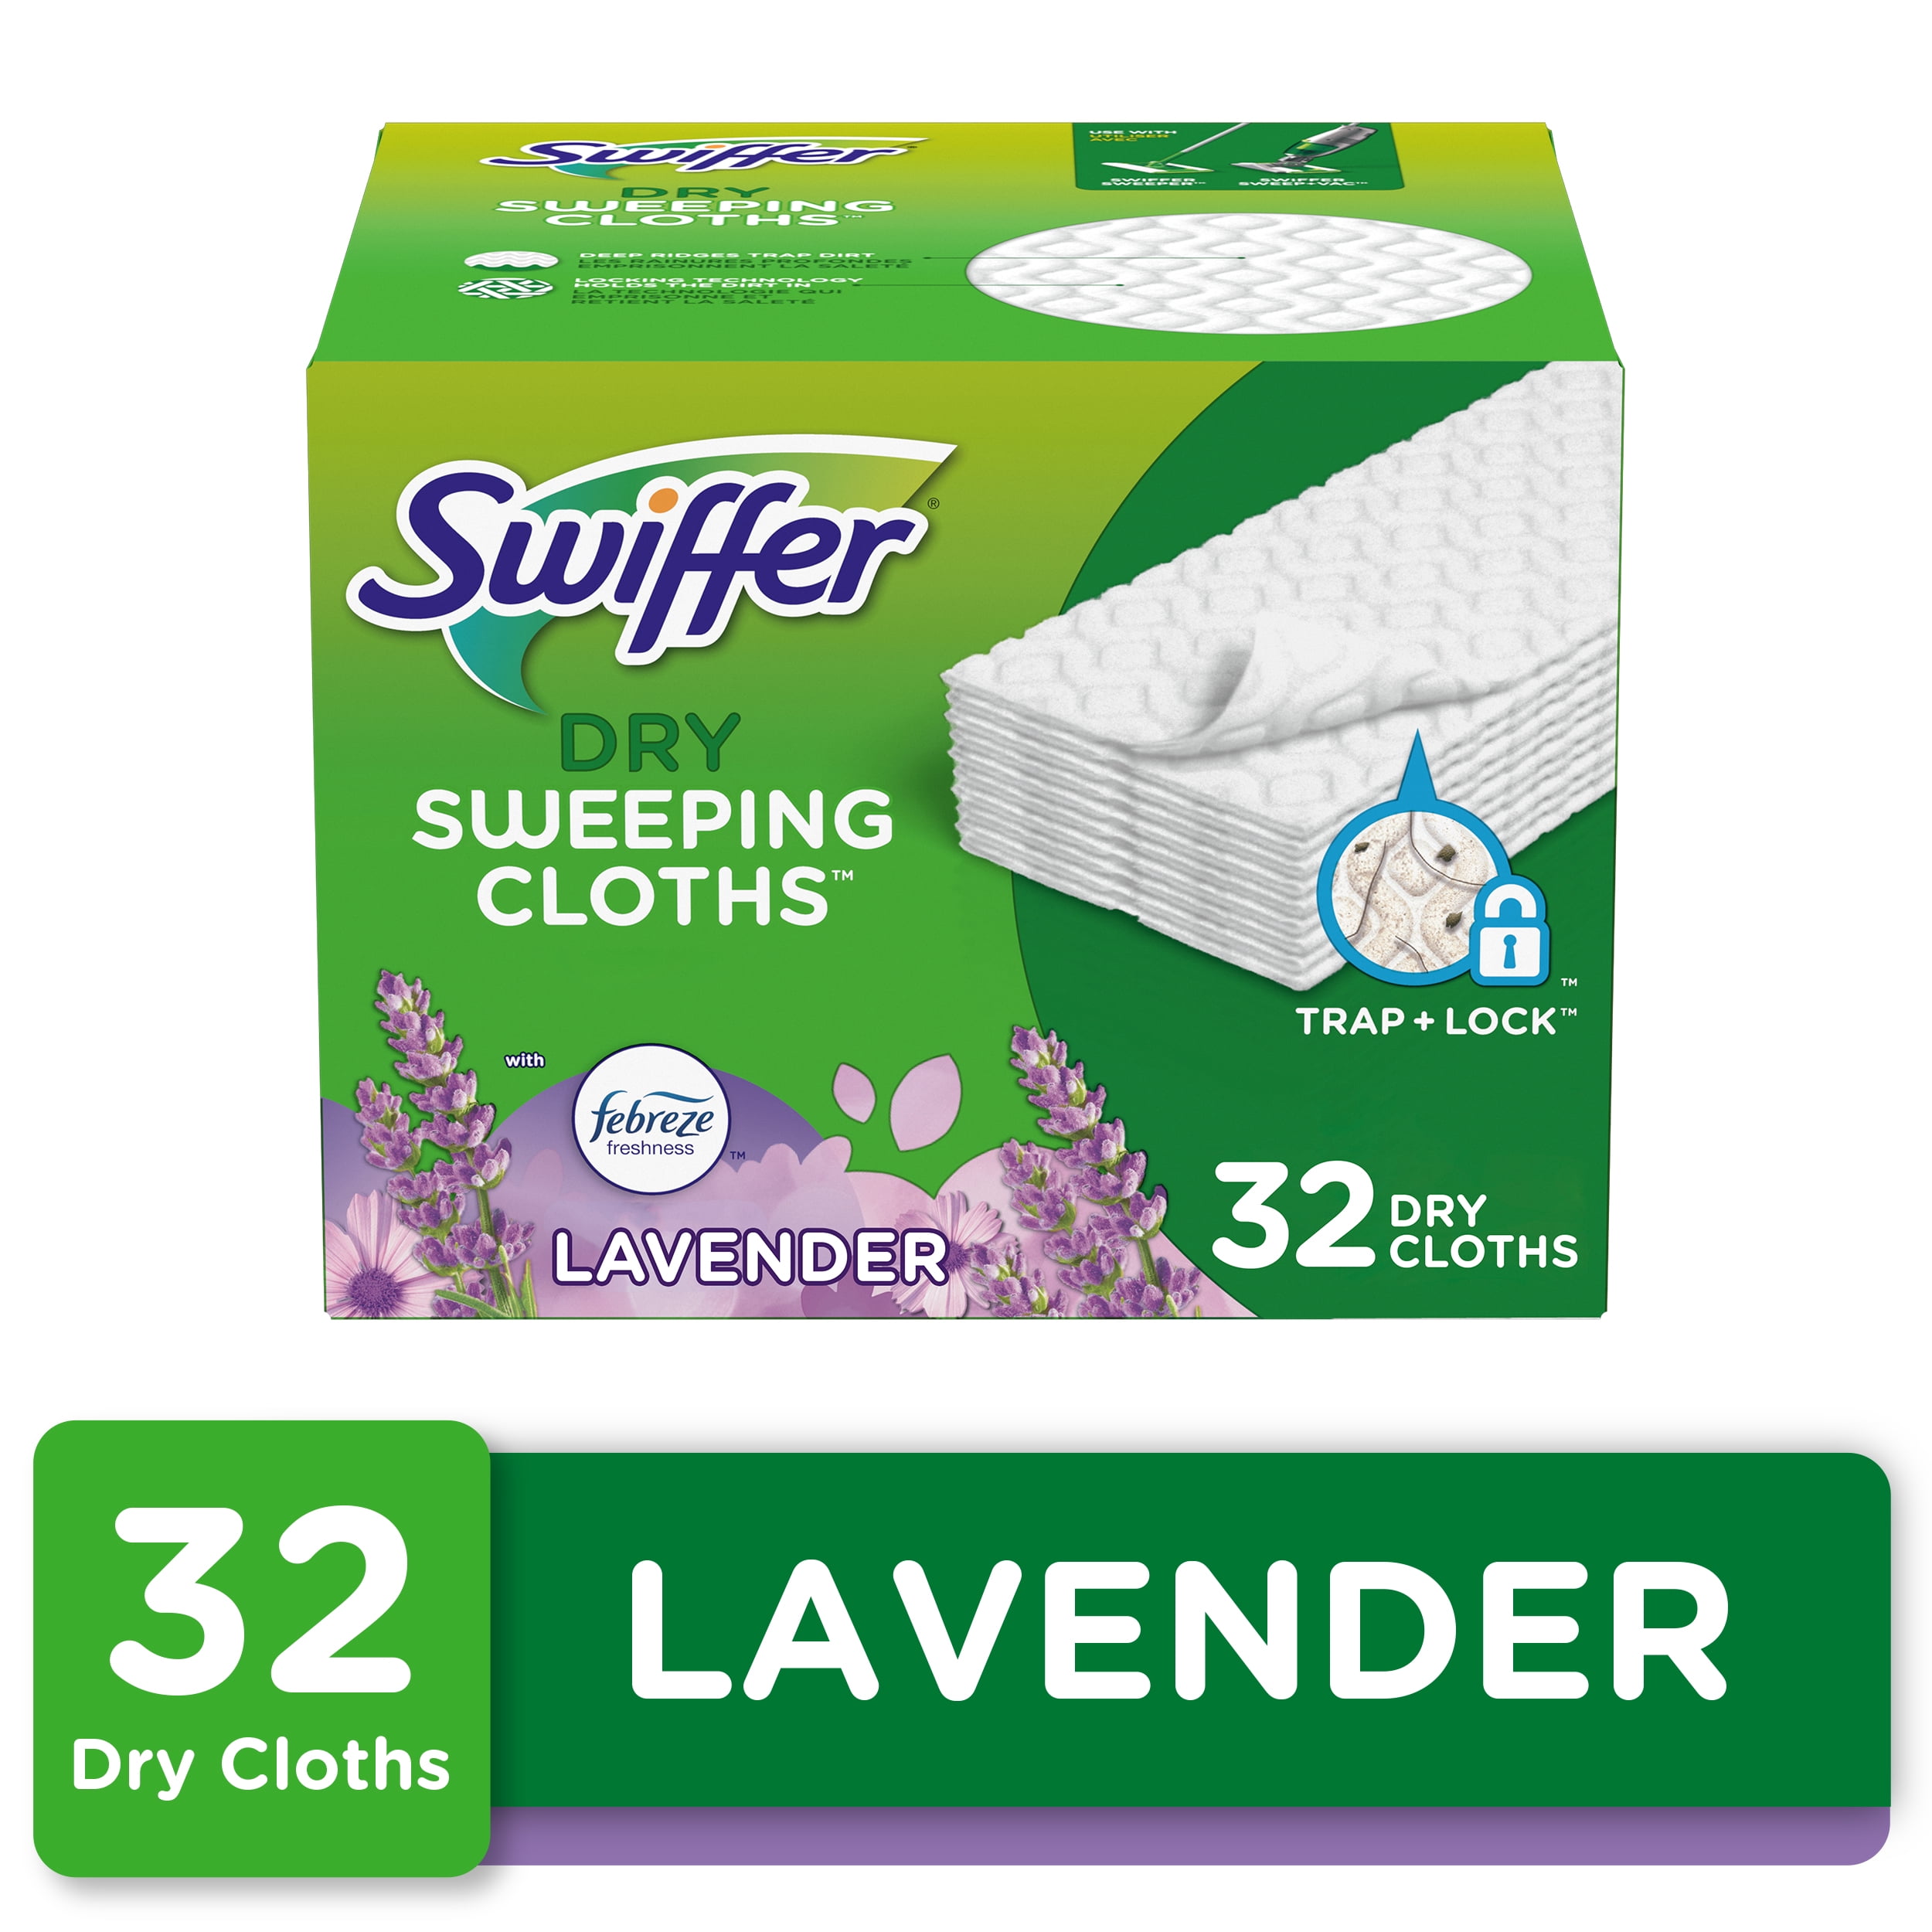 Swiffer Sweeper Dry Sweeping Cloths, Lavender, 32 Ct